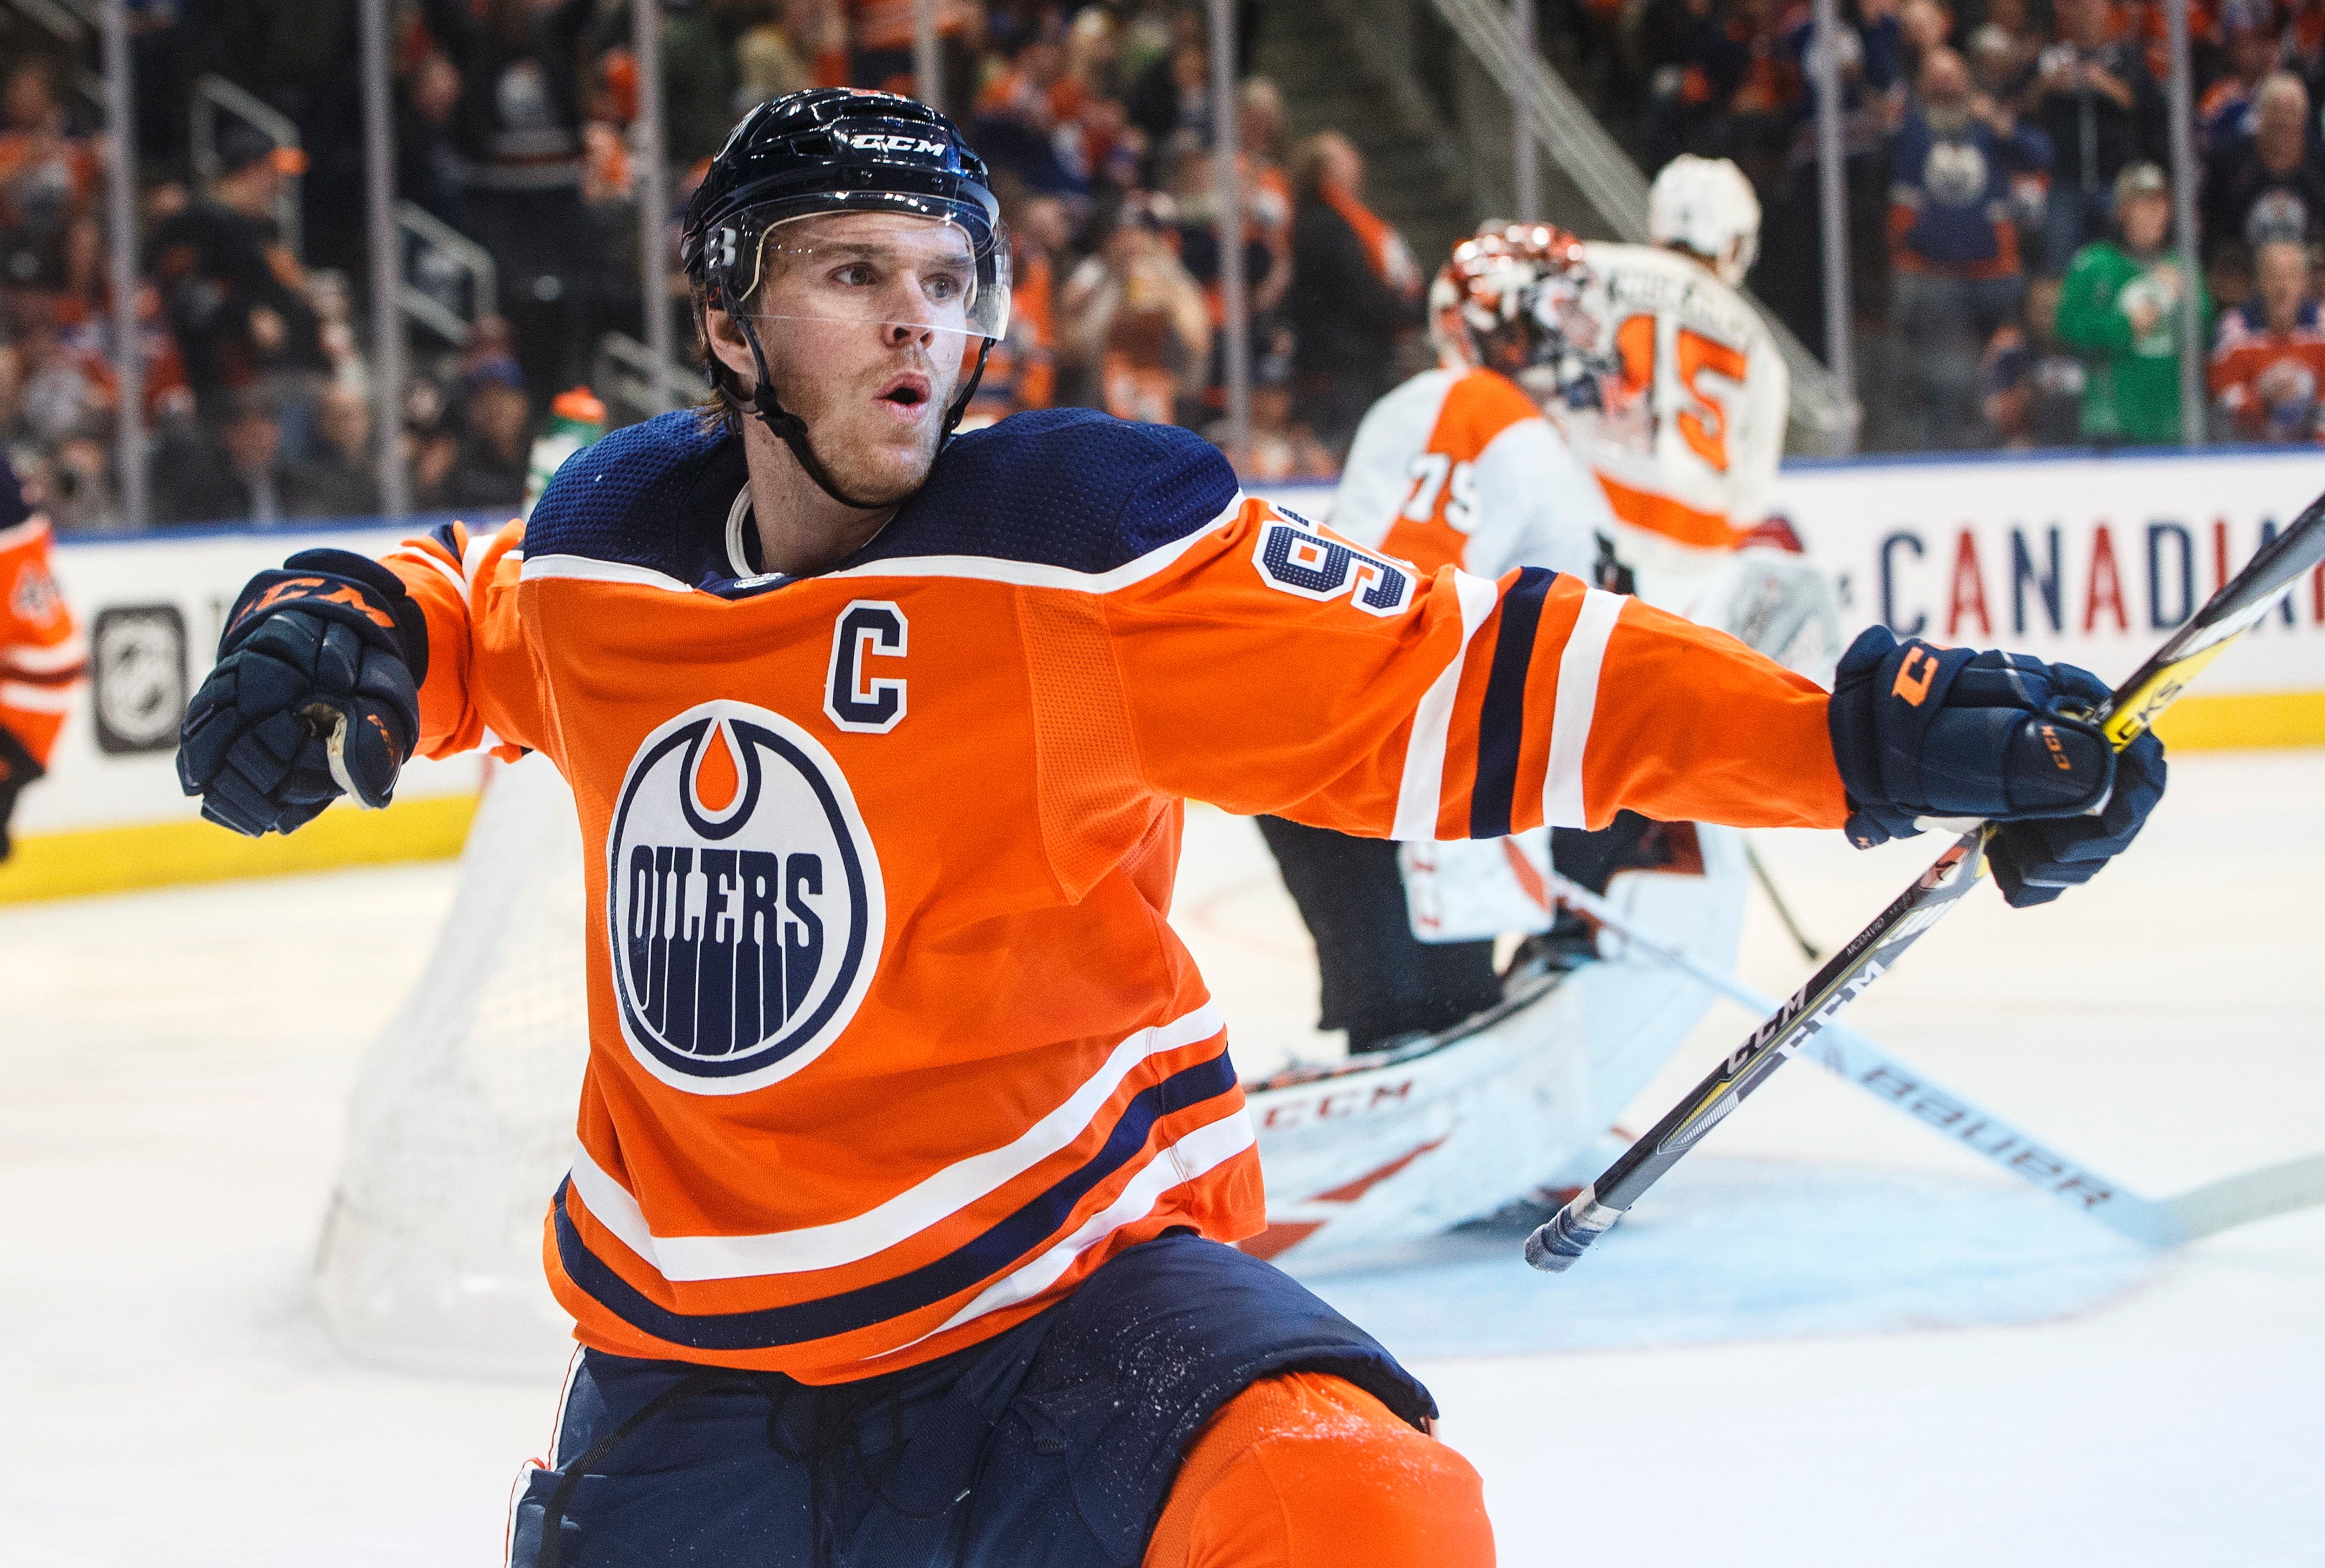 The Oilers must act fast to address their hole on defence after